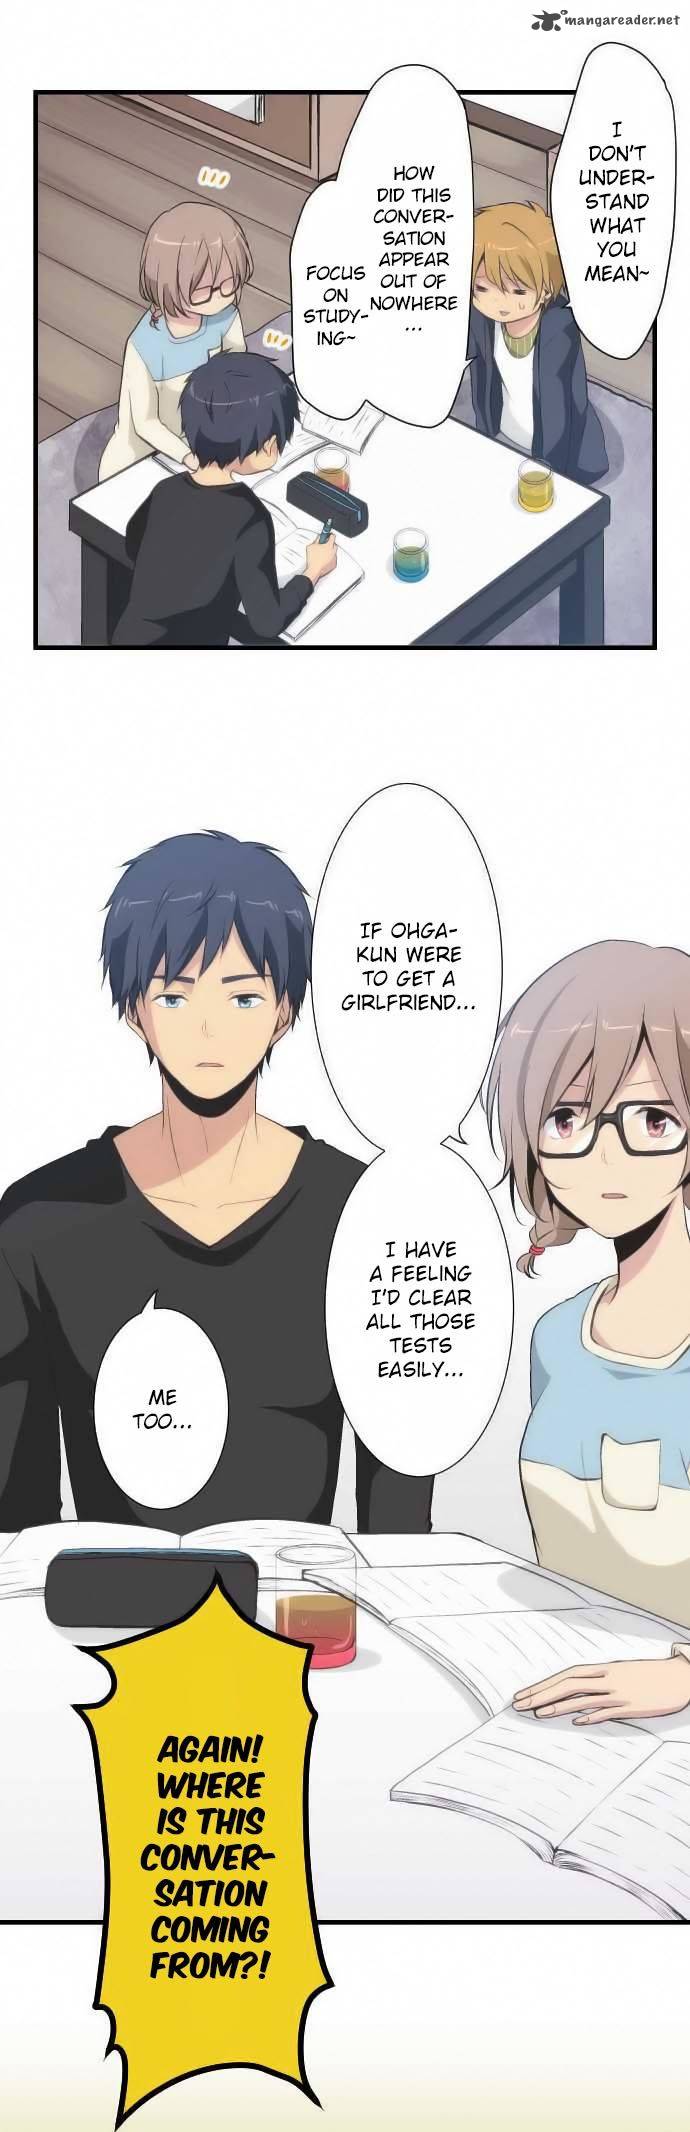 Relife 47 17